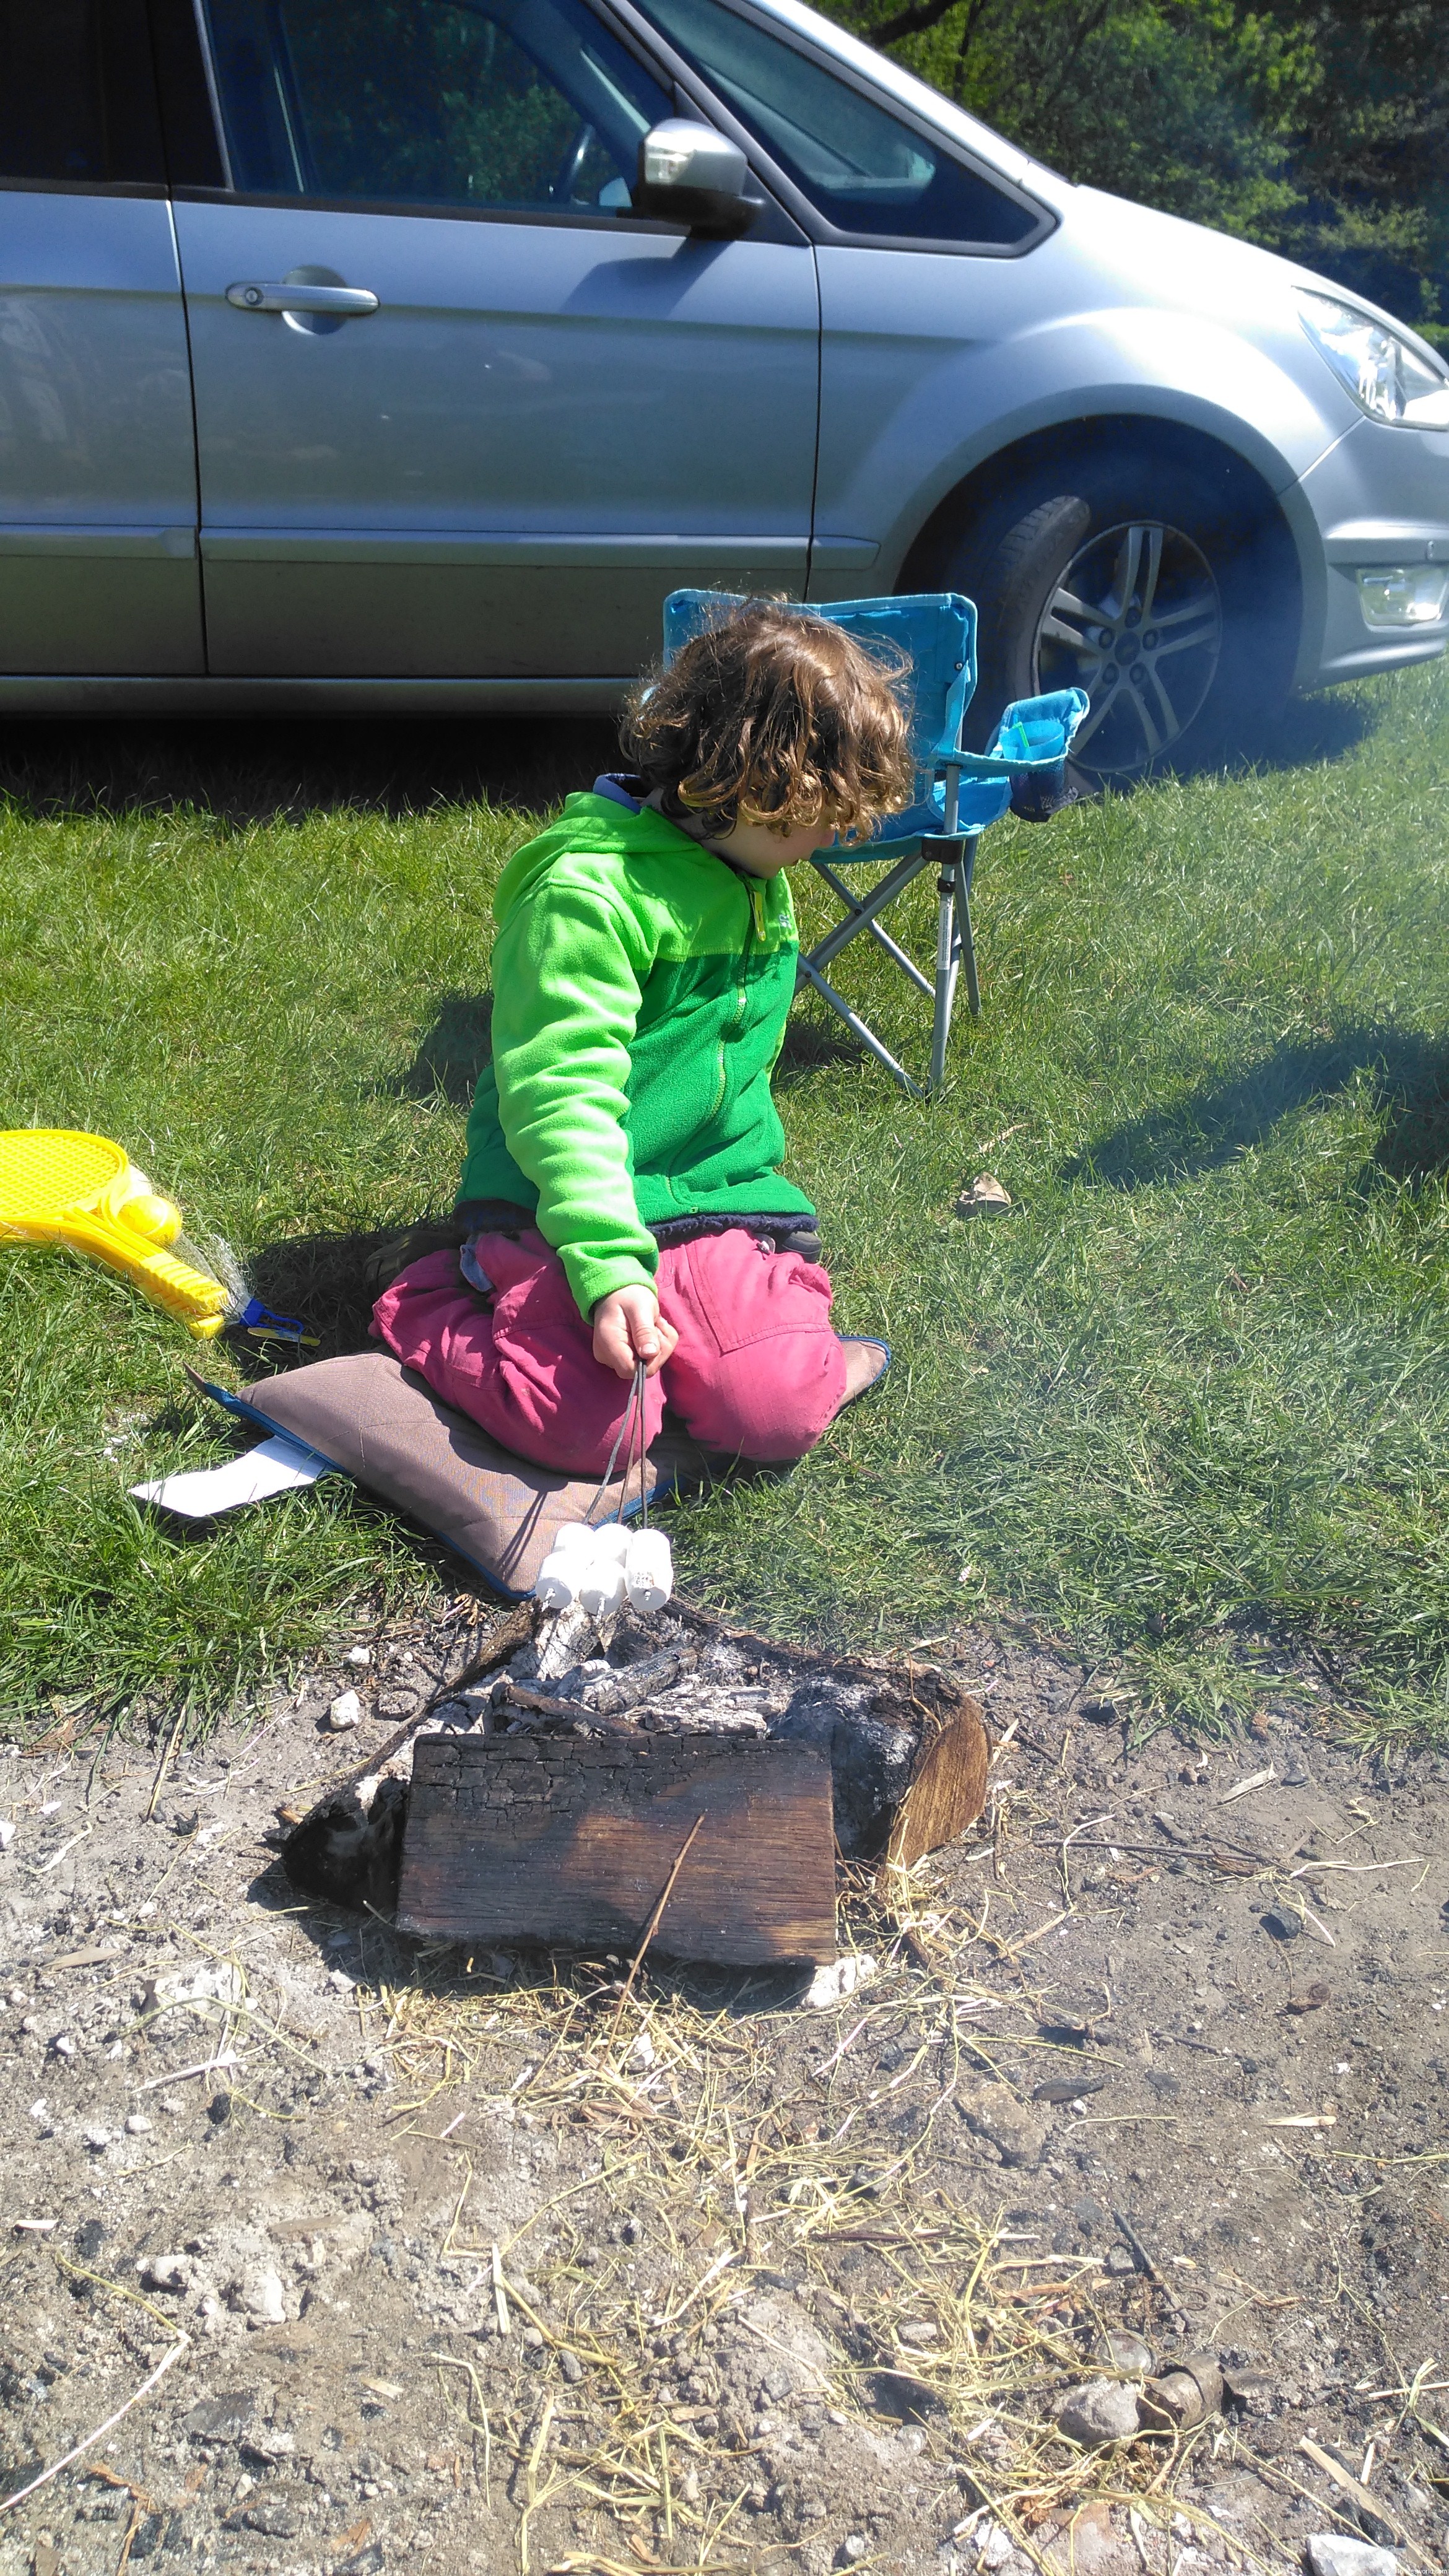 Cooking marshmallows on his own fire